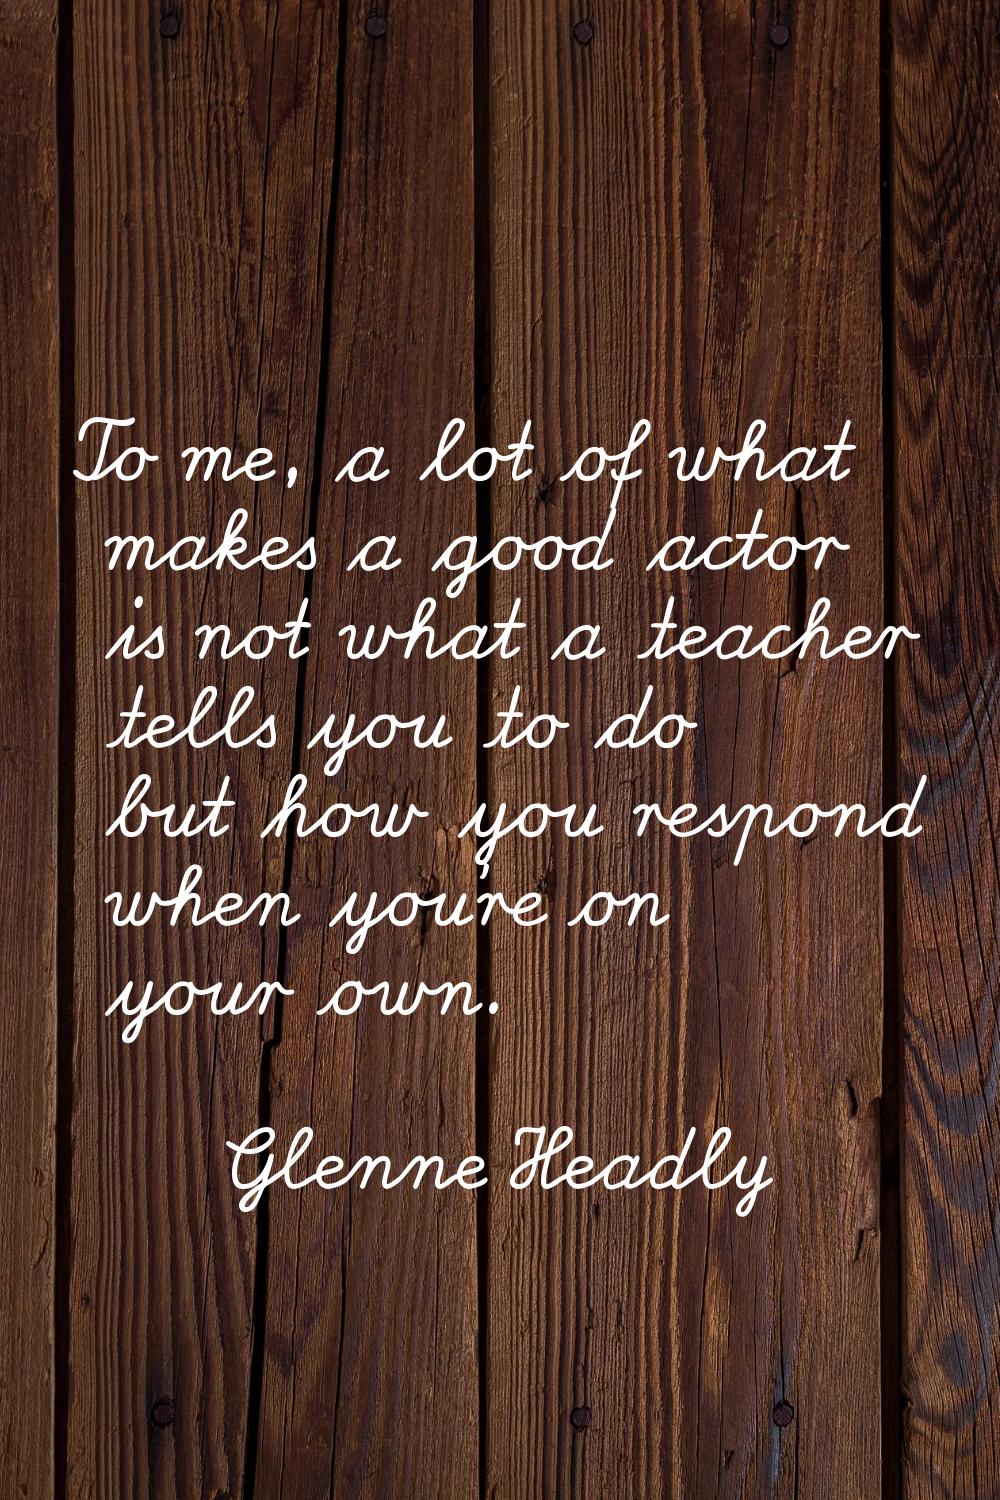 To me, a lot of what makes a good actor is not what a teacher tells you to do but how you respond w